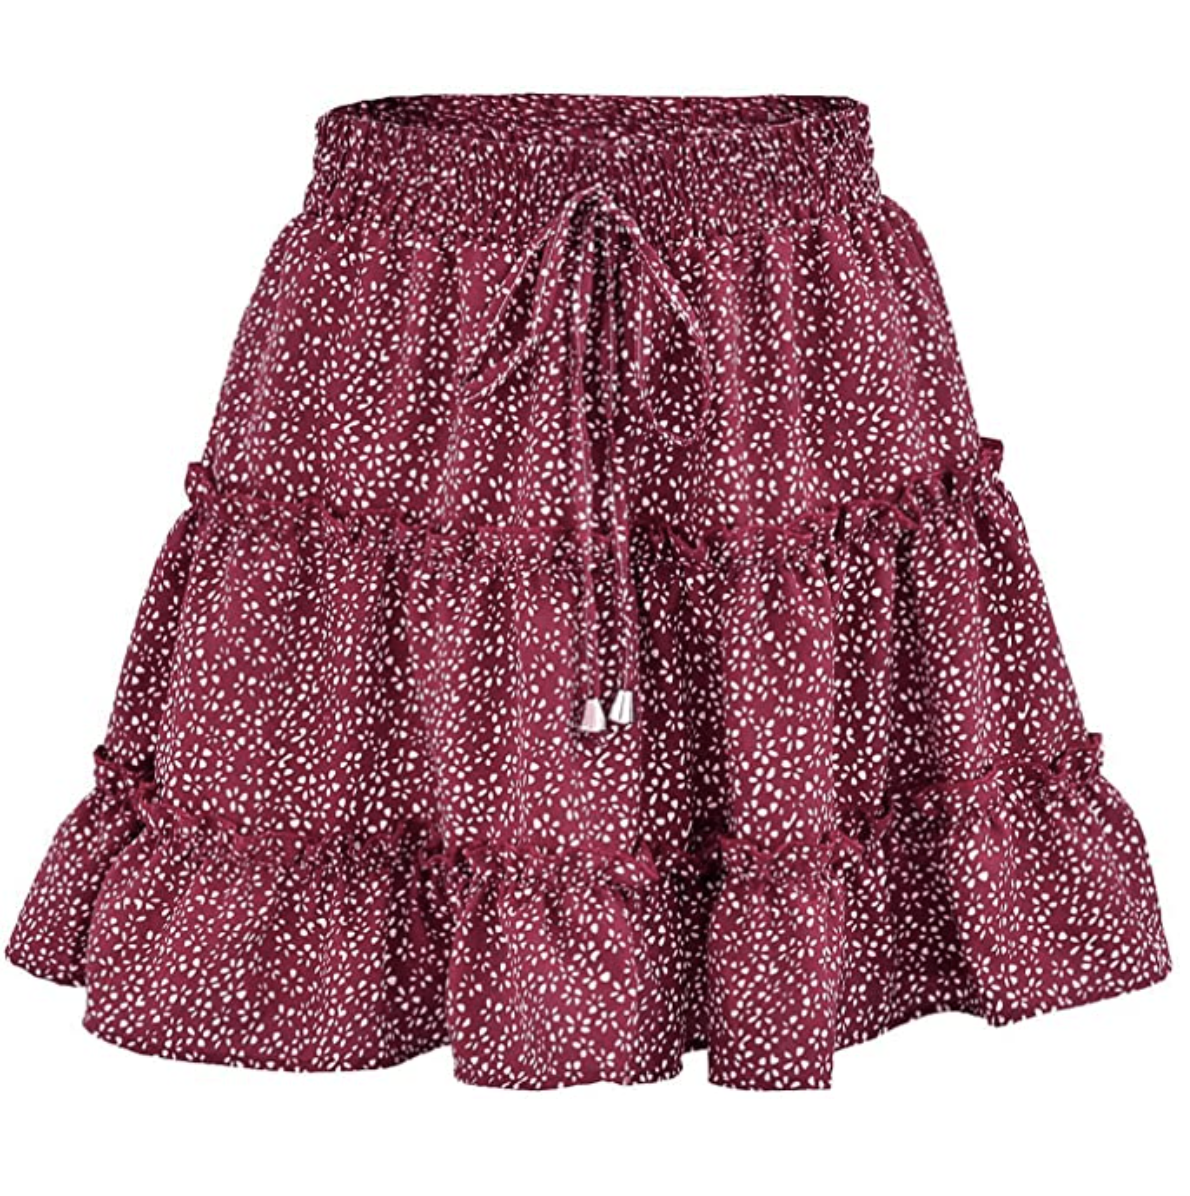 this-ruffle-miniskirt-is-summer’s-must-have-fashion-staple